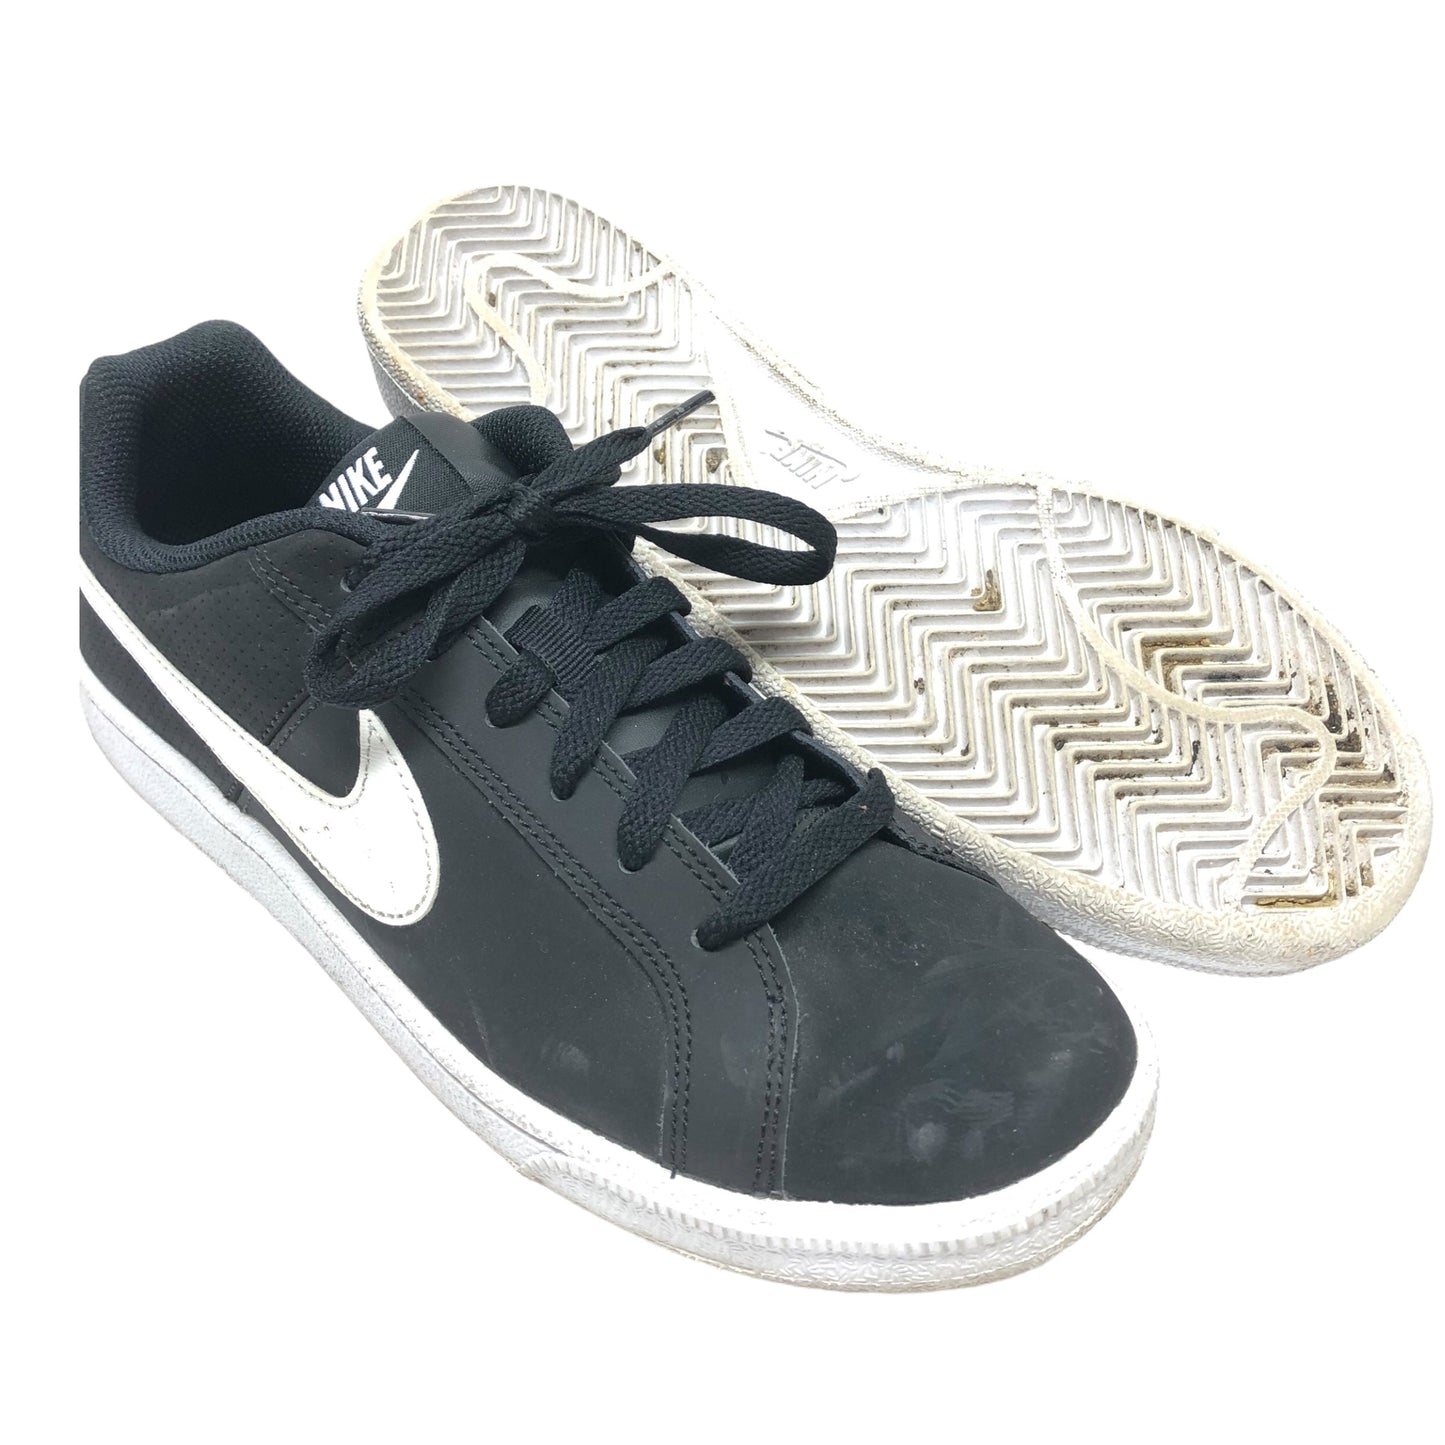 Black & White Shoes Sneakers Nike, Size 9